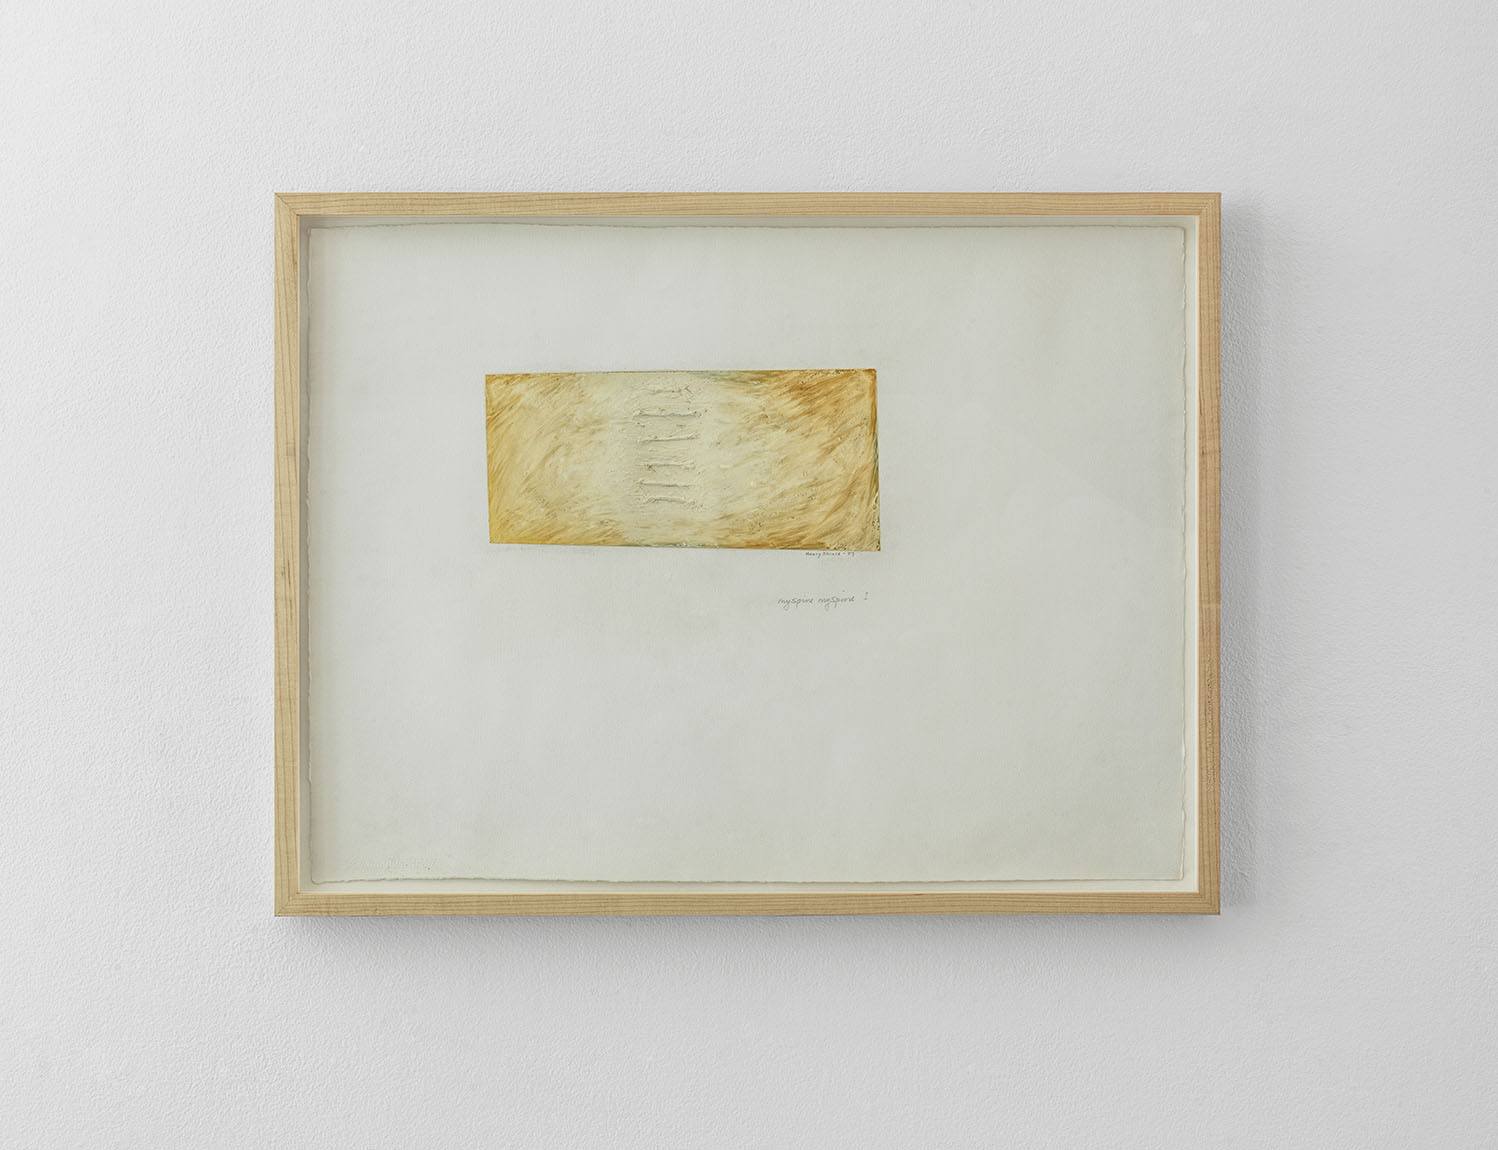 Textured yellow and white oil drawing in a small rectangular shape on fabric paper with a light wooden frame